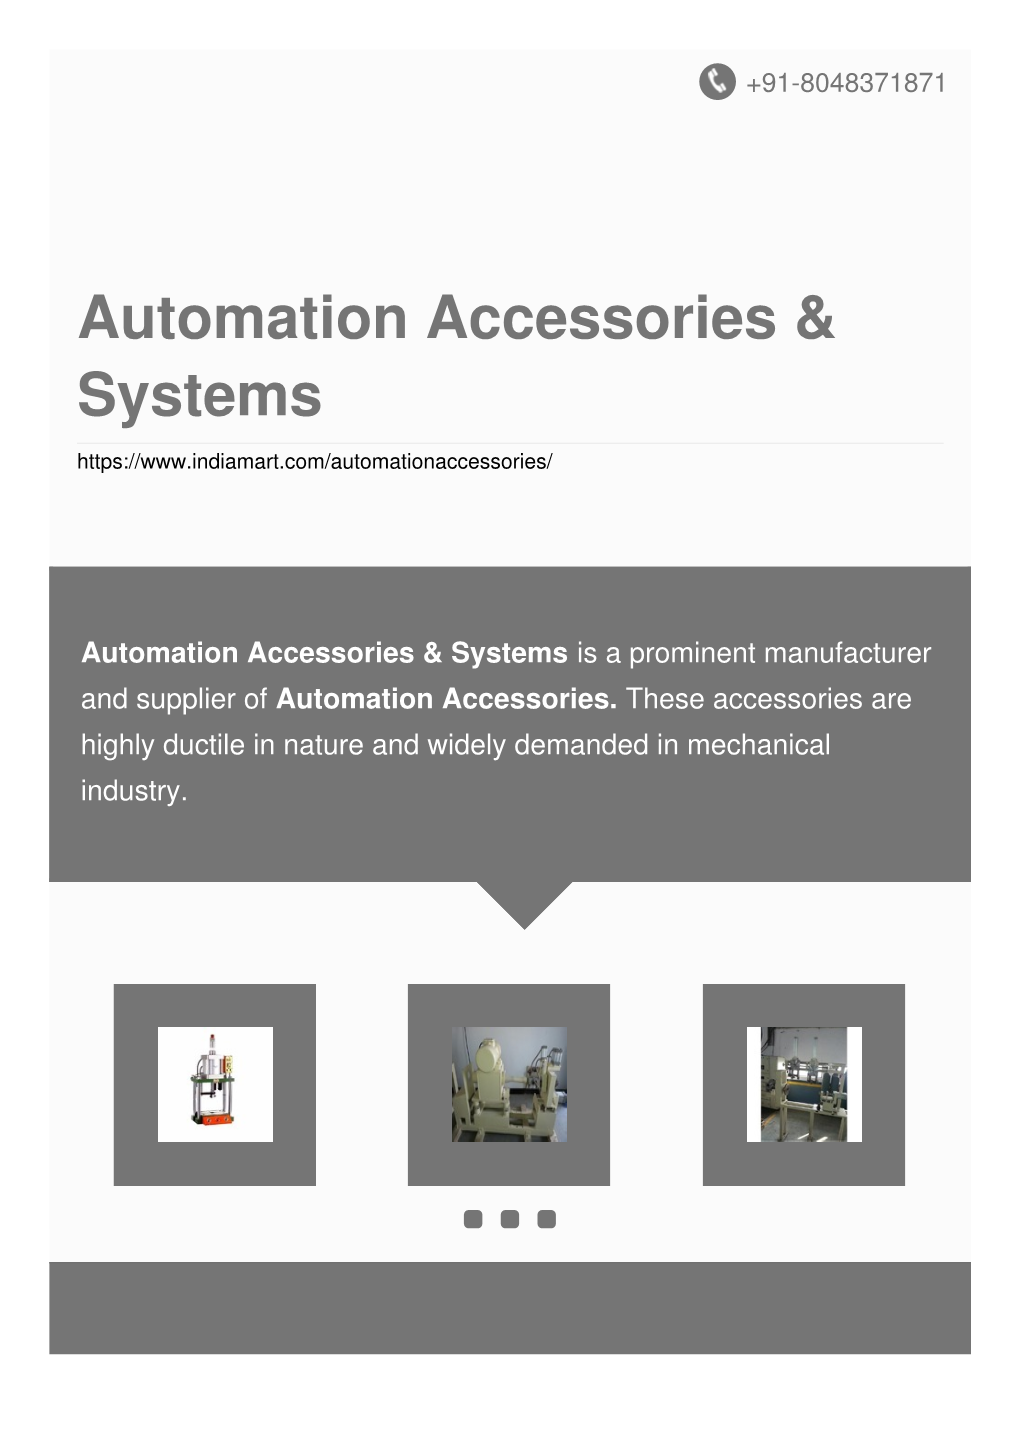 Automation Accessories & Systems